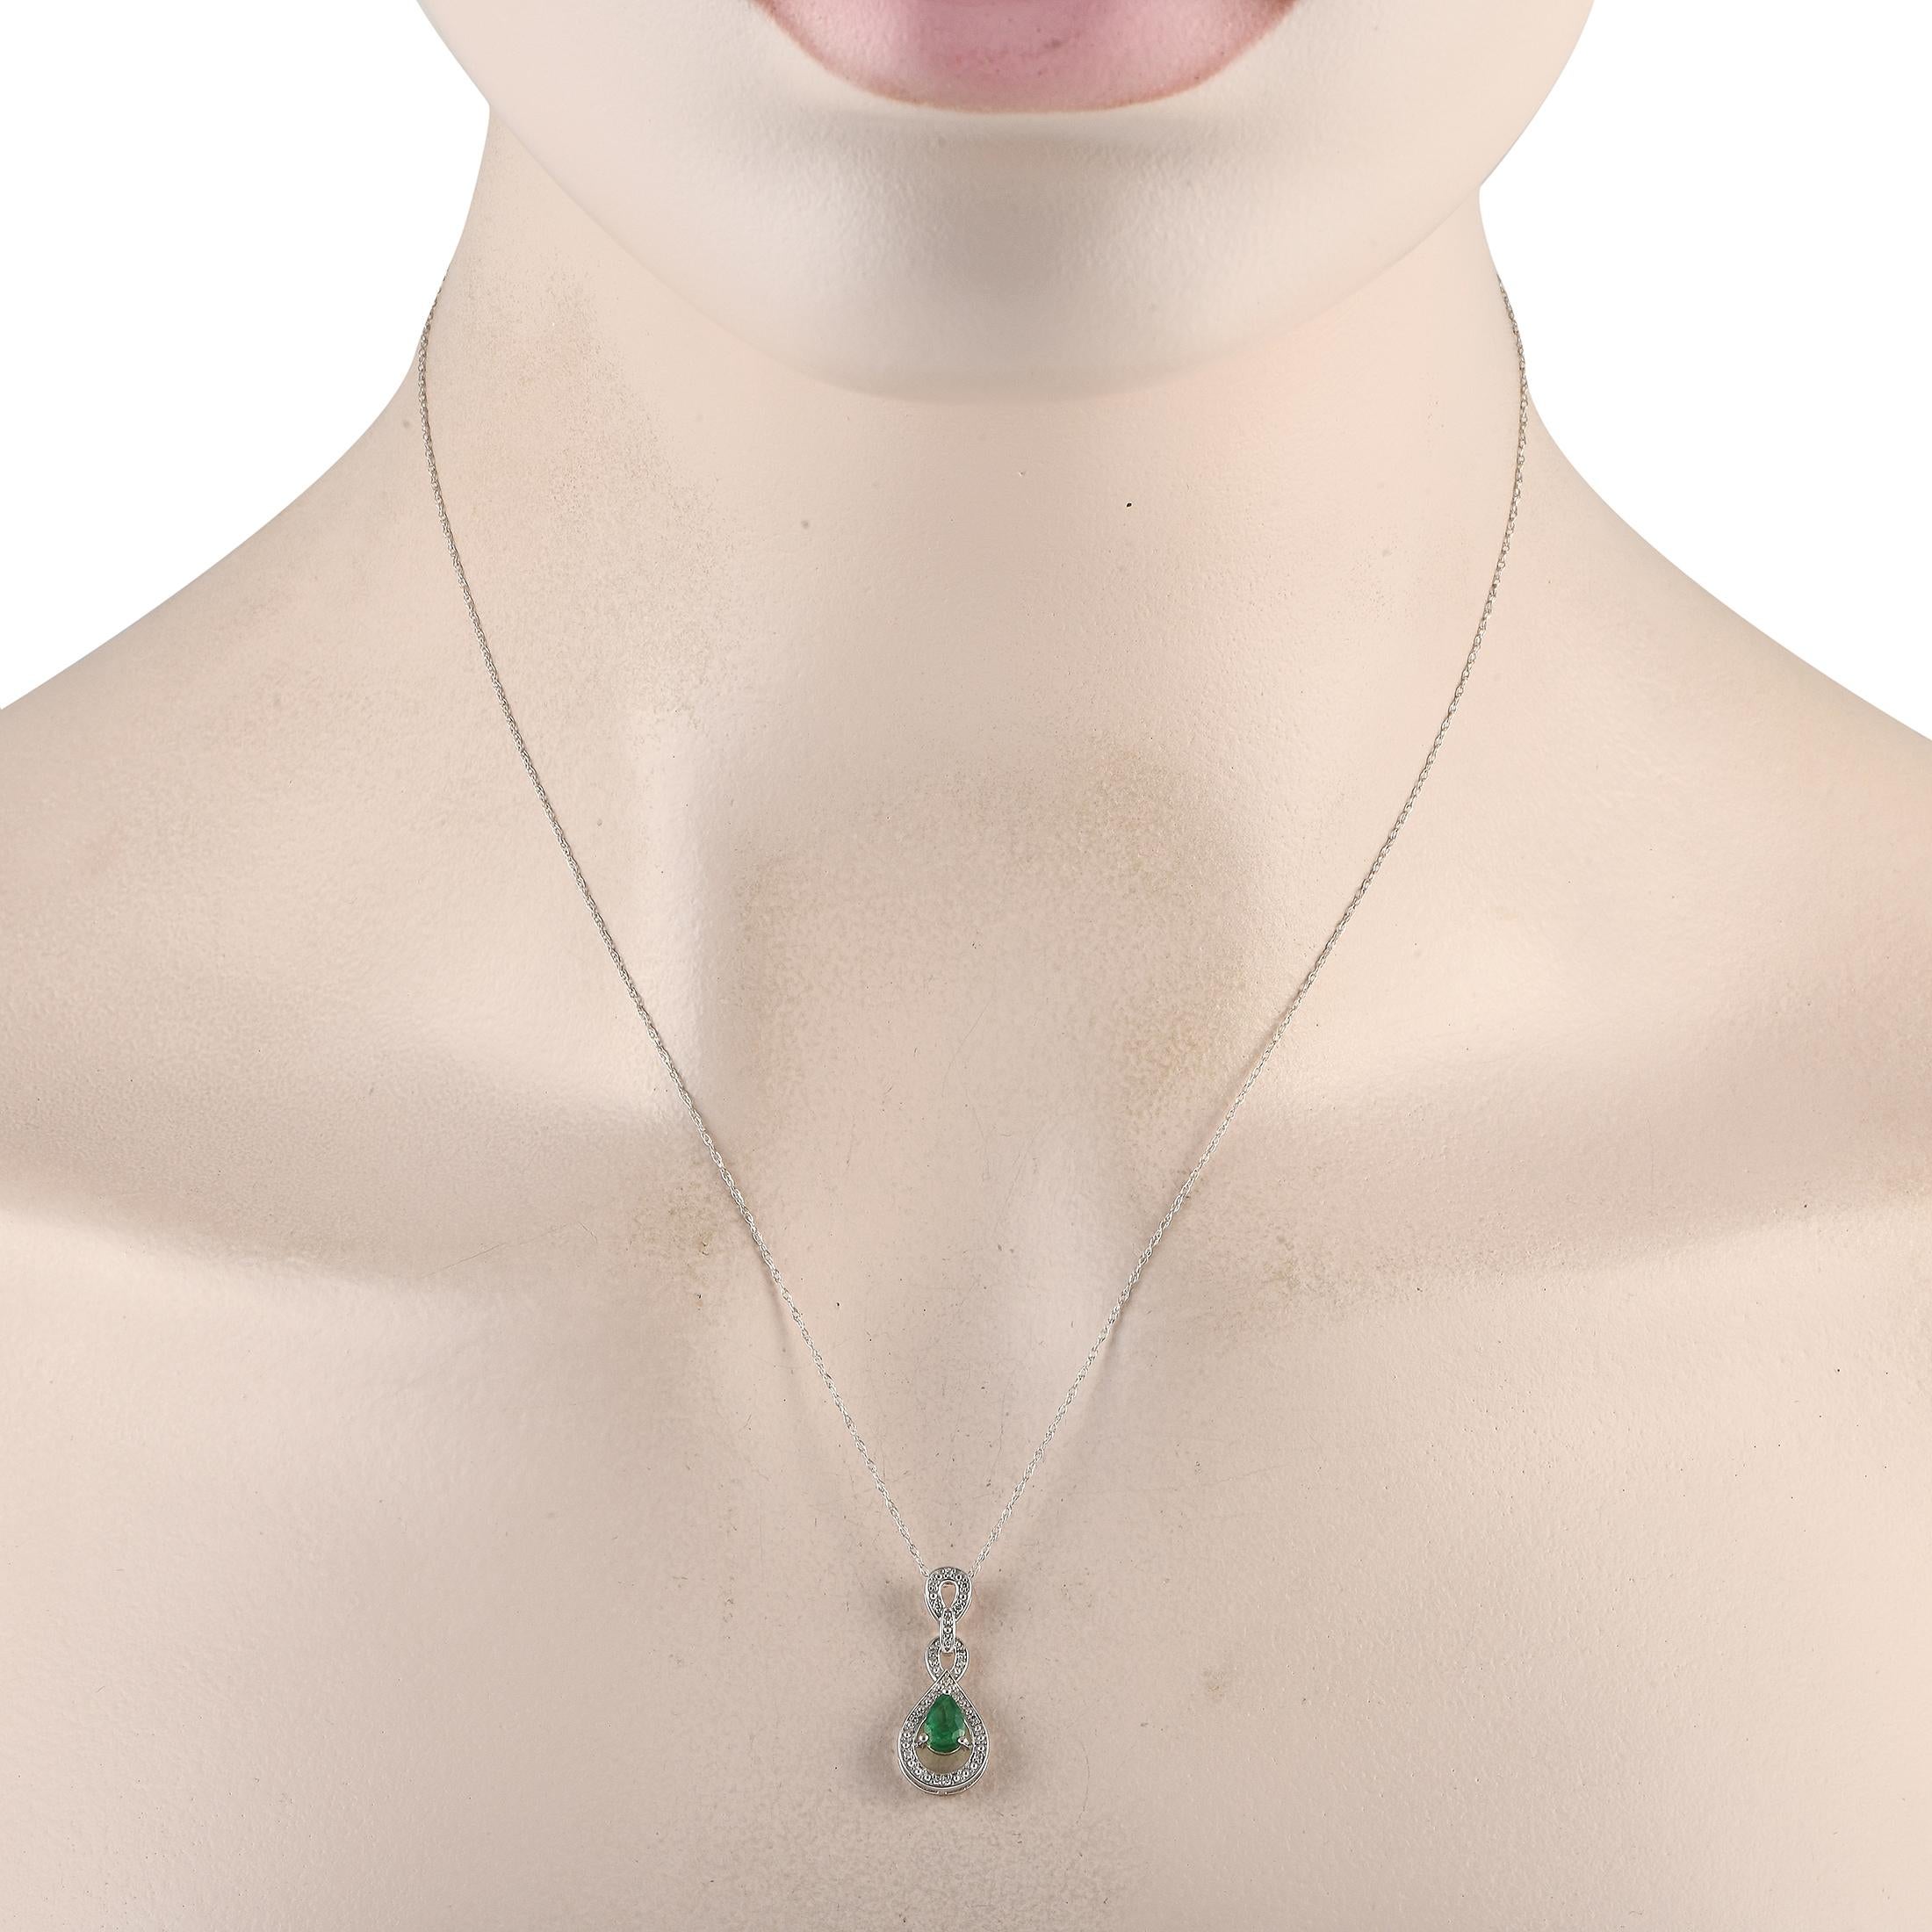 An intricate 14K White Gold pendant measuring 0.85 long by 0.45 wide makes this necklace simply unforgettable. Suspended from an 18 chain, it comes to life thanks to an elegant oval-cut Emerald gemstone and sparkling Diamond accents totaling 0.08